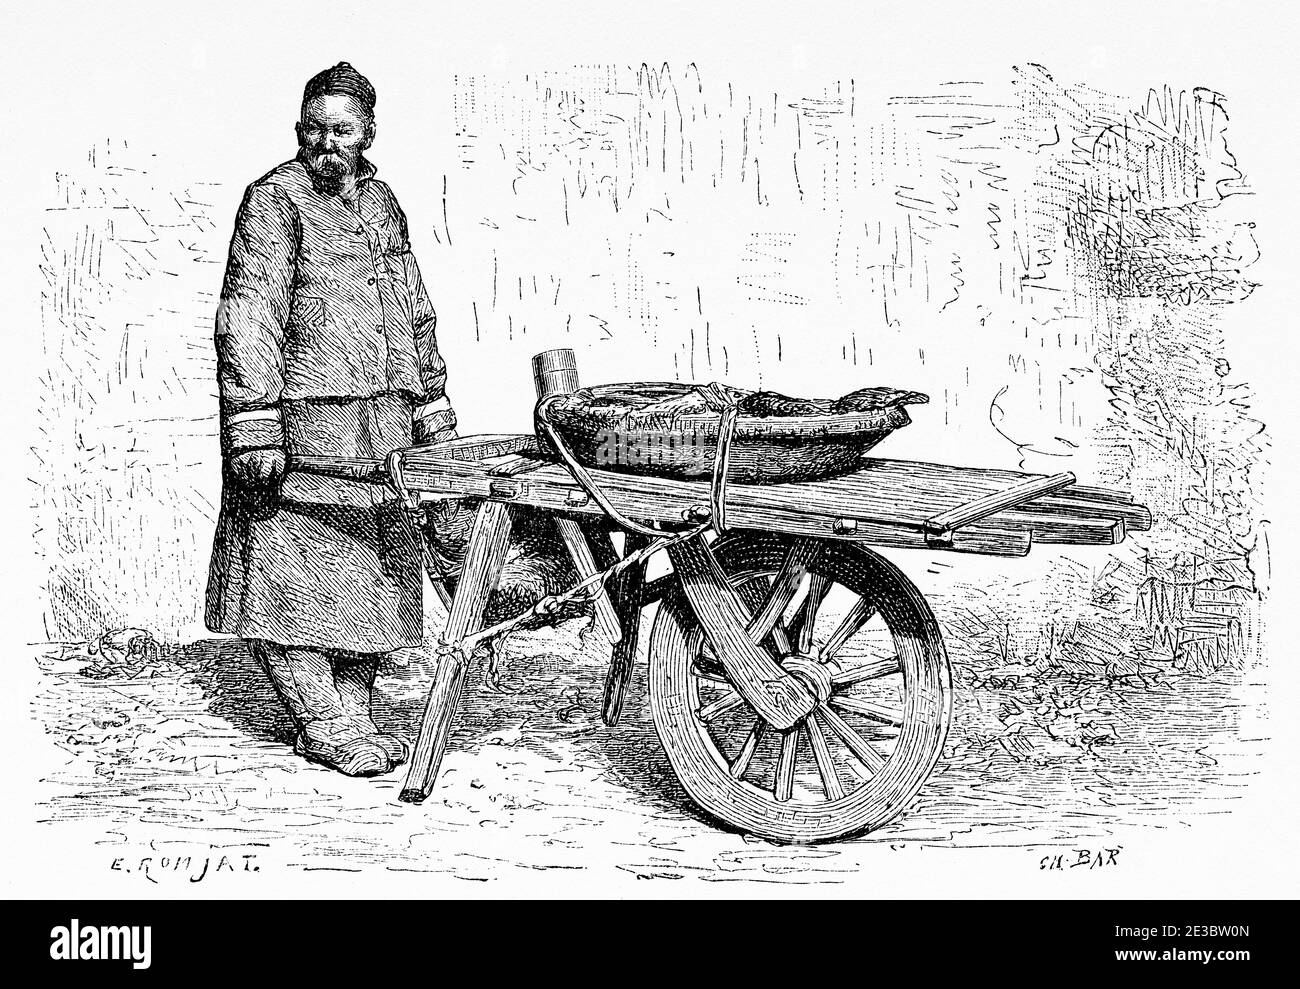 Fruit vendor at Donghuamen market, Beijing, China. Old 19th century engraved illustration, Trip to Beijing and North China 1873 Stock Photo